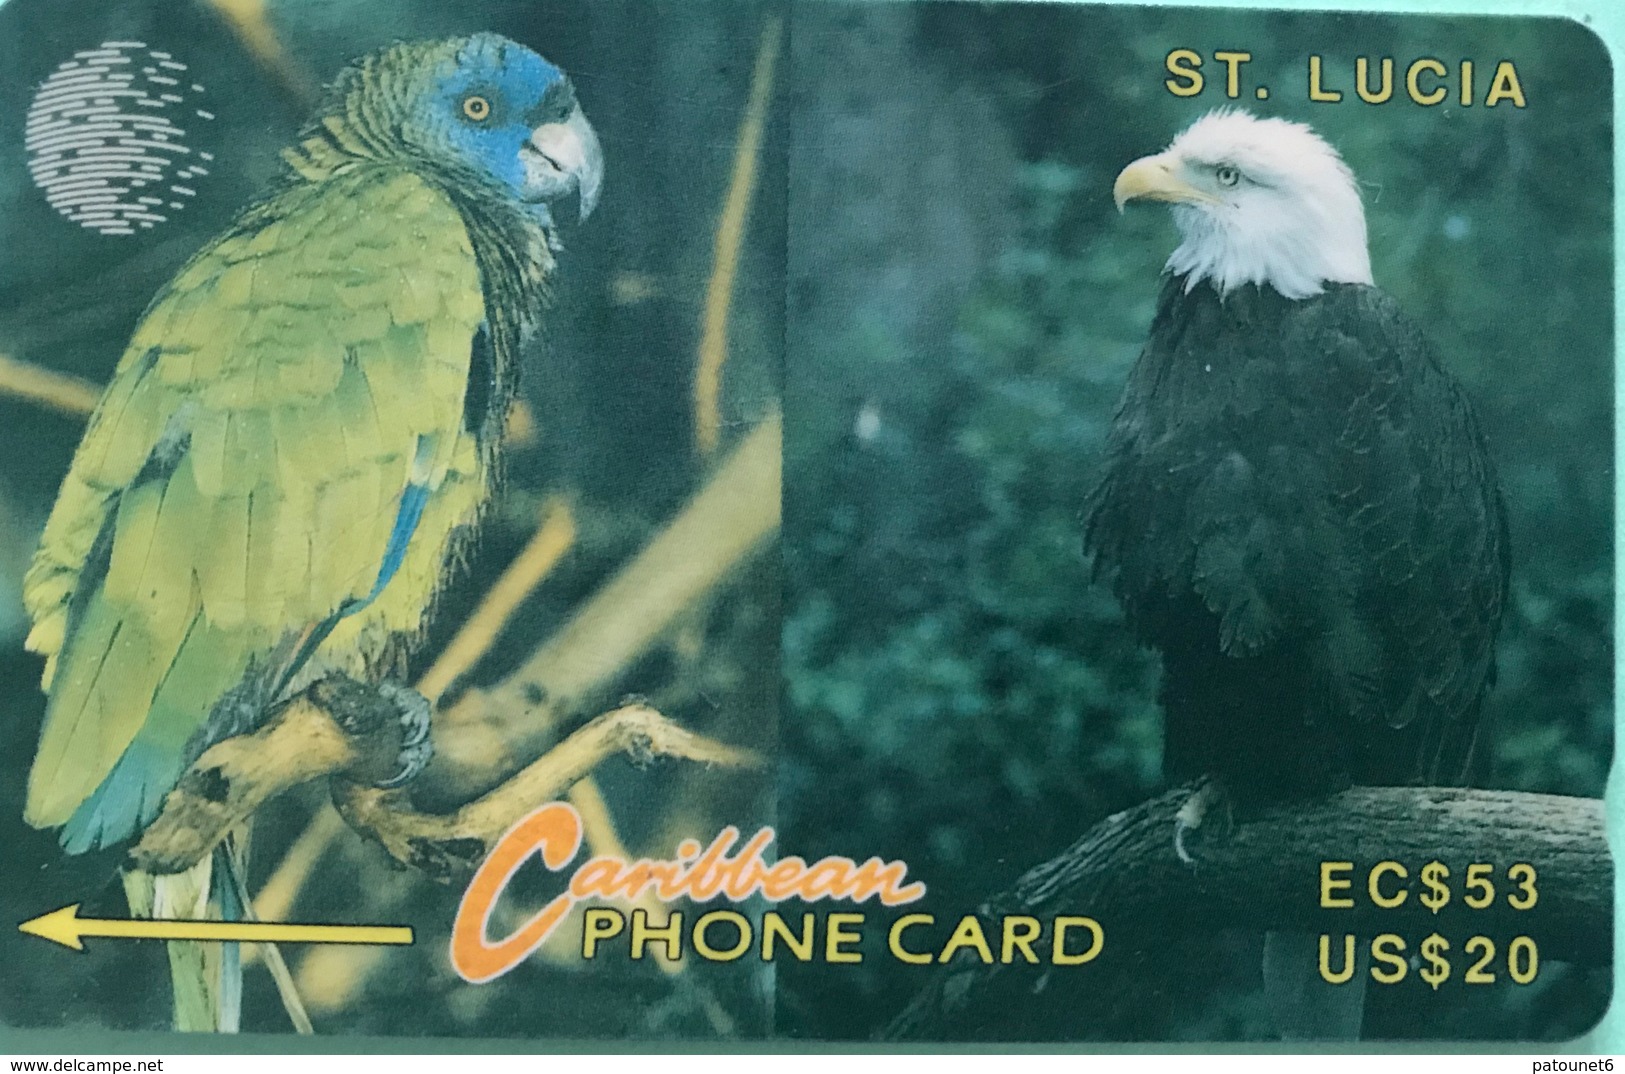 SAINTE LUCIE  -  Phonecard  - Cable & Wireless   -  Eagle And Amazon  -  EC $ 53  -  US $ 20 - St. Lucia